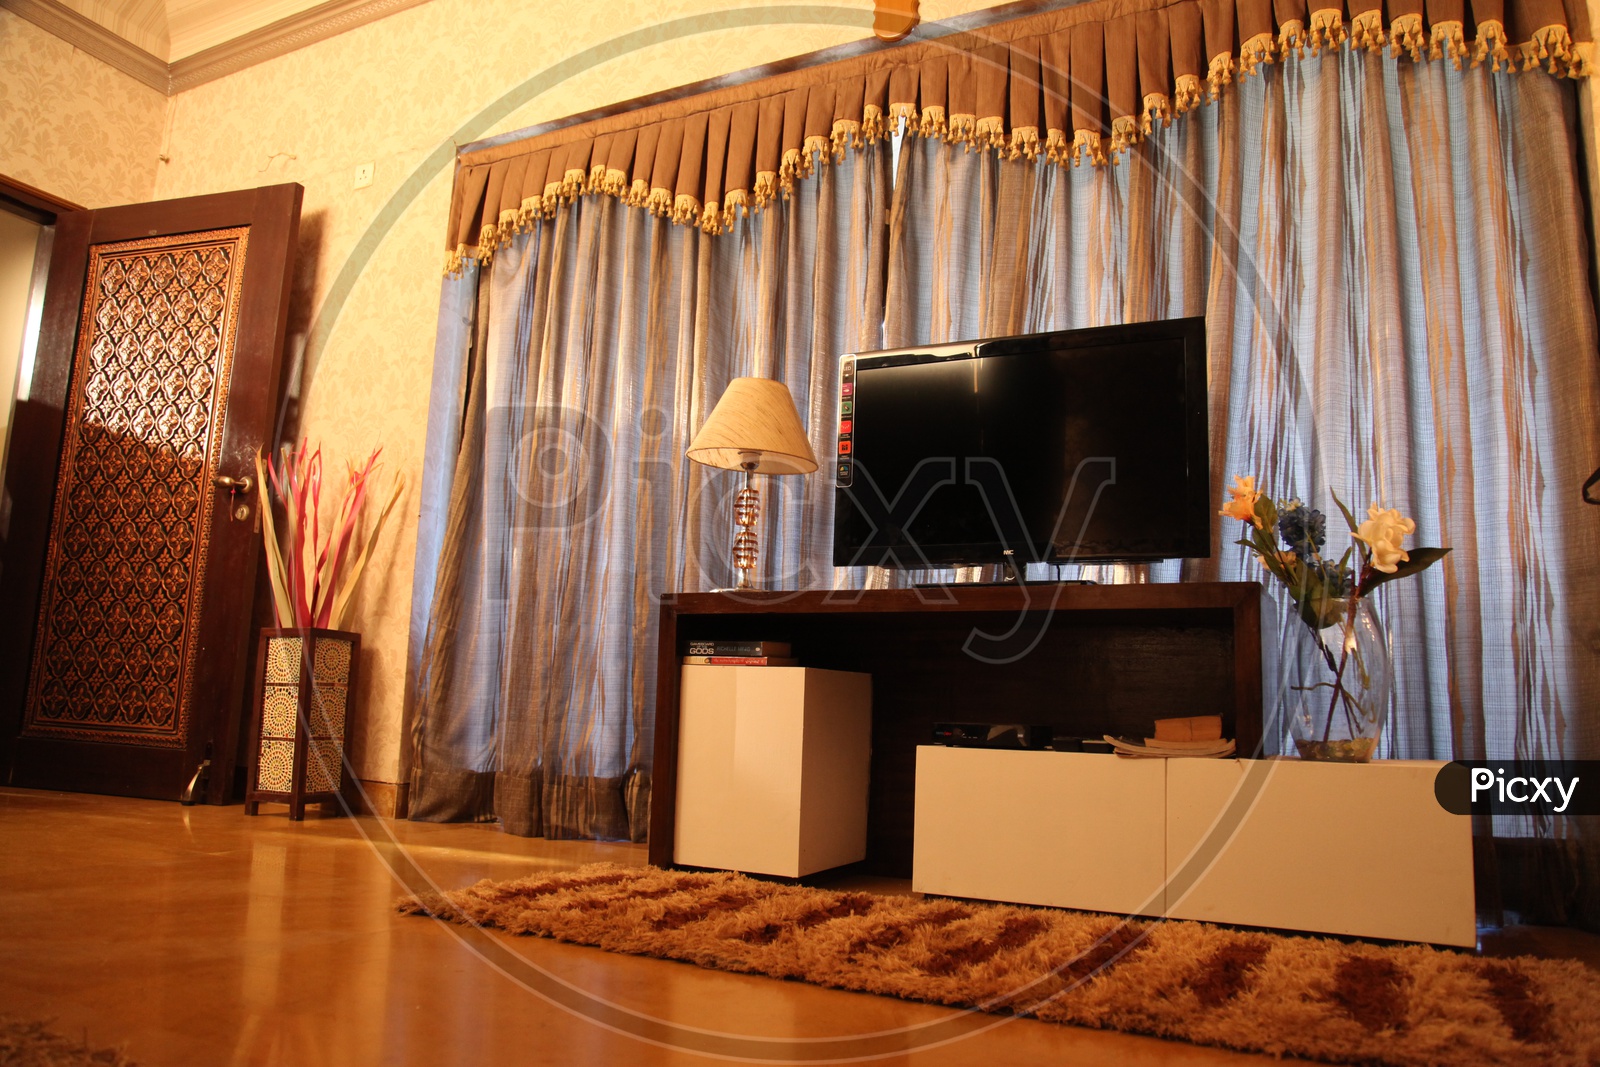 Interiors of a House with TV